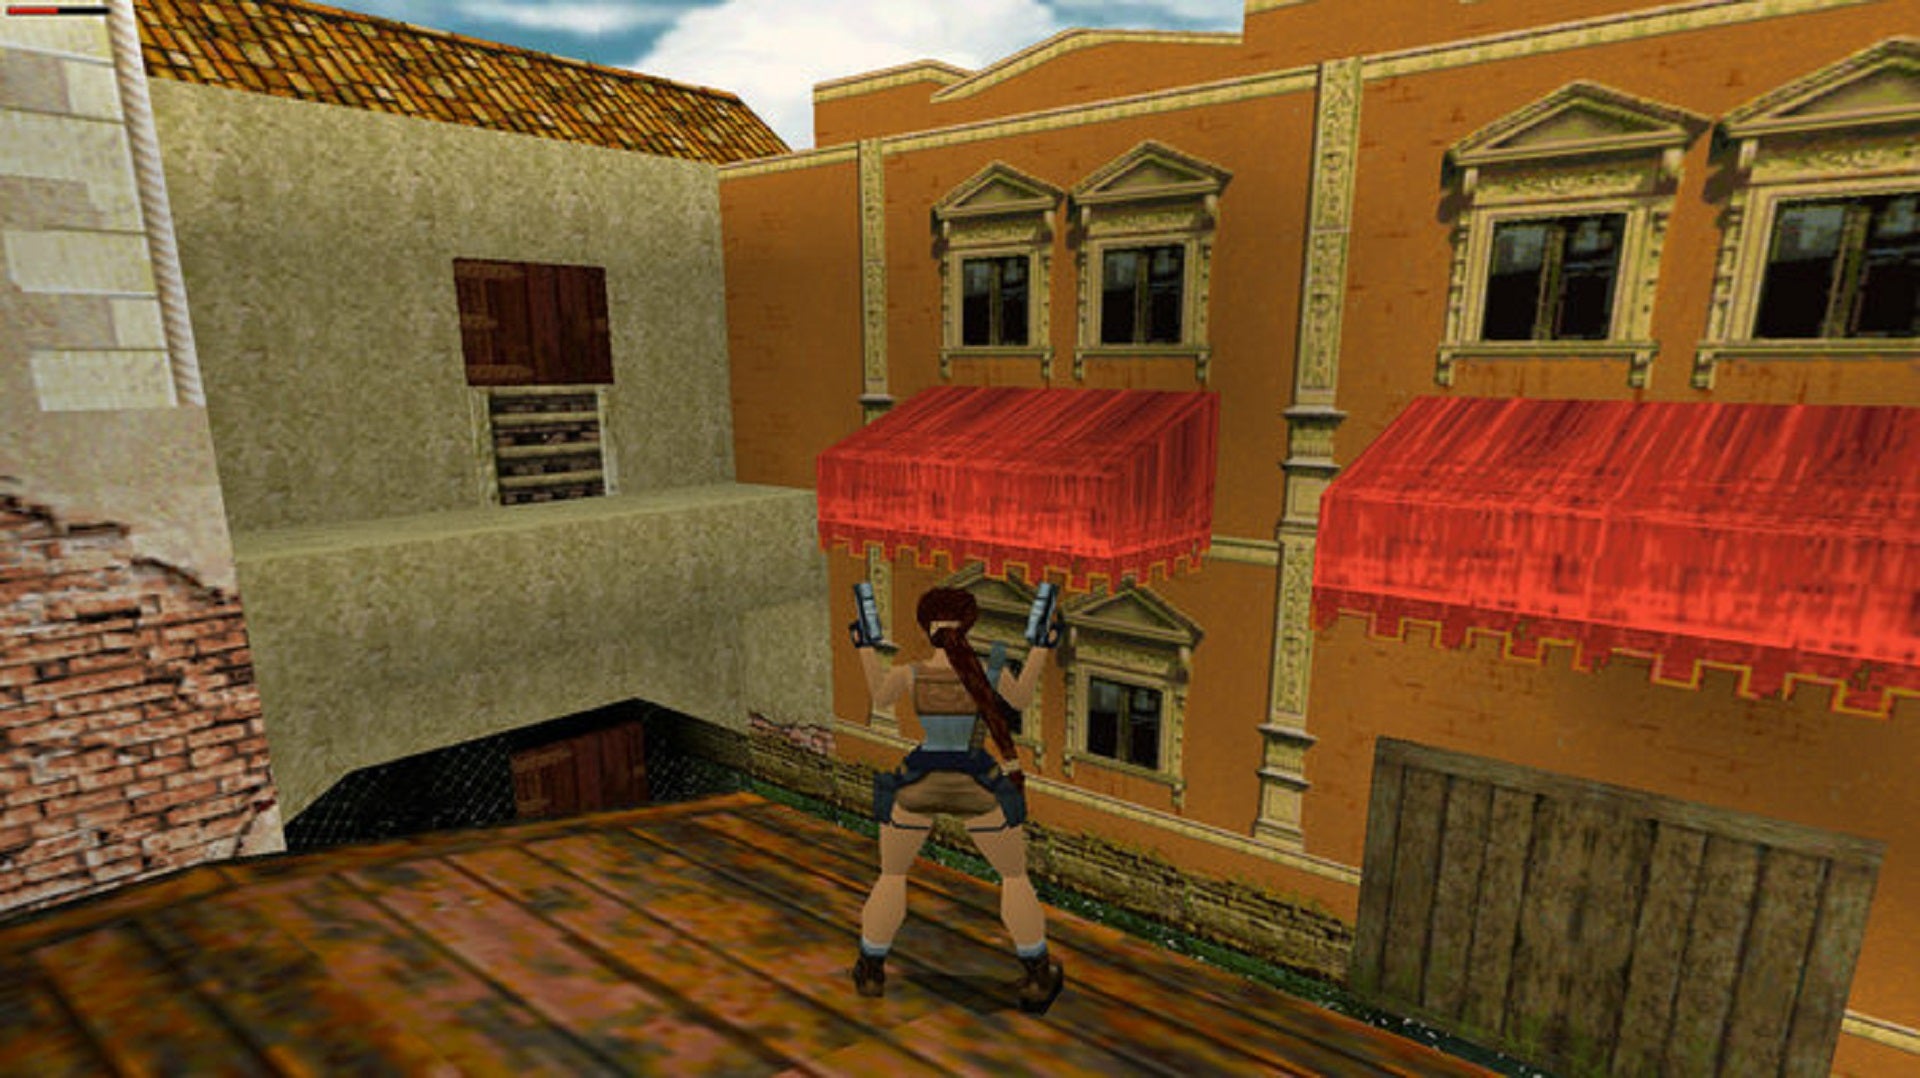 Lara Croft stands on the roof of a Venice dwelling wielding her dual pistols in Tomb Raider II.